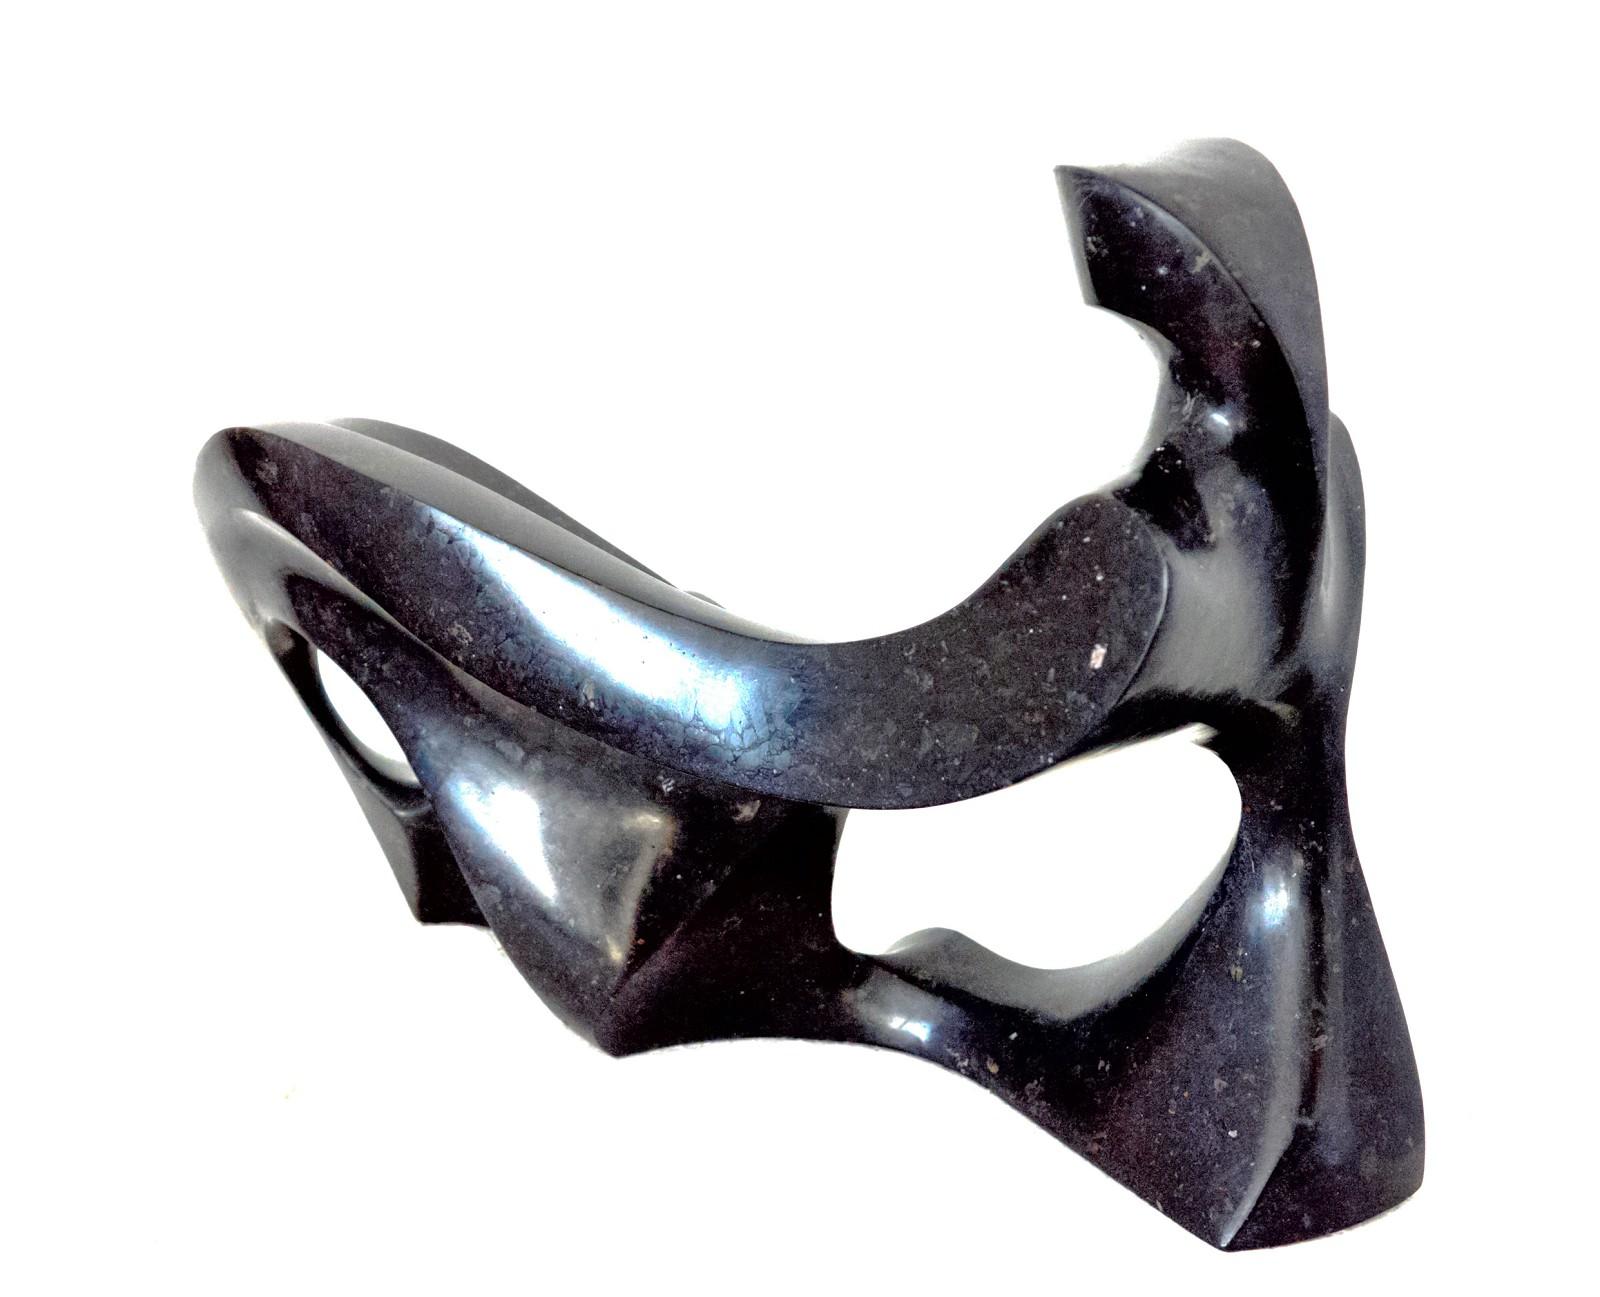 Repose 6/50 - smooth, black granite, figurative, tabletop sculpture - Contemporary Sculpture by Jeremy Guy